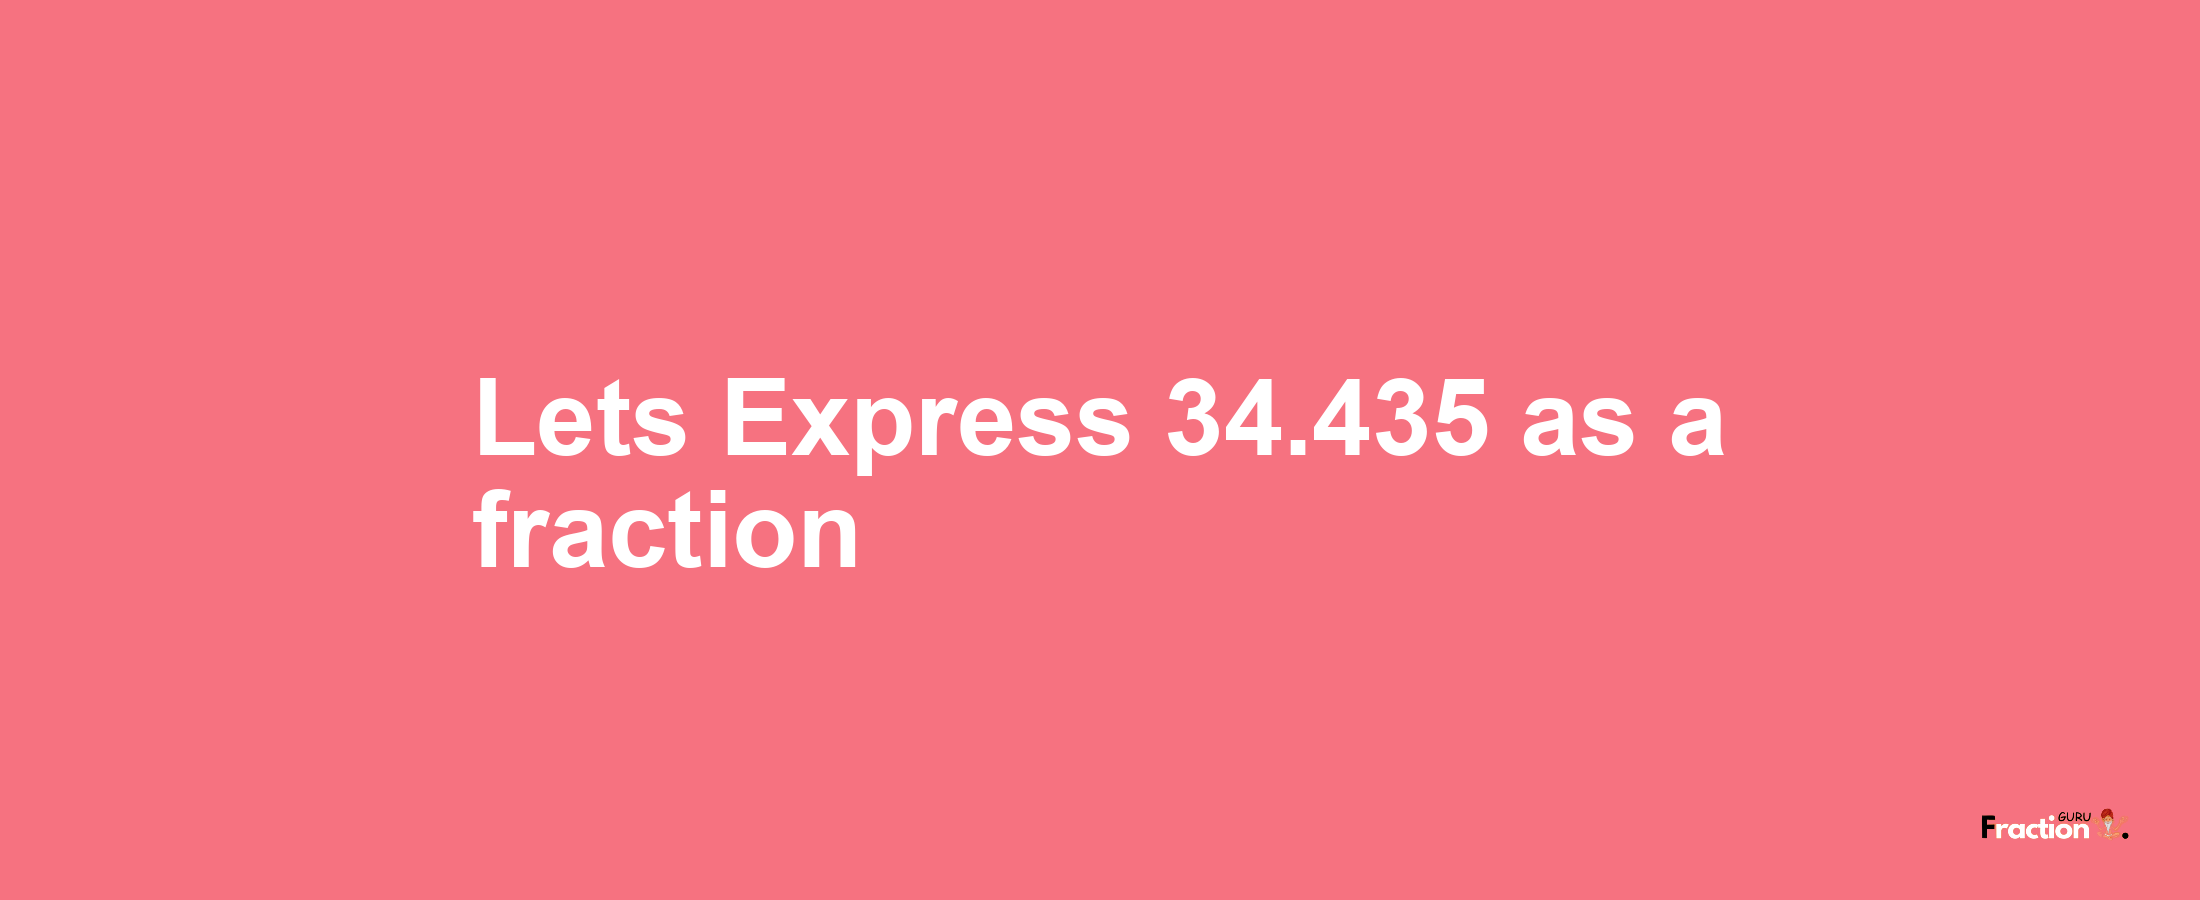 Lets Express 34.435 as afraction